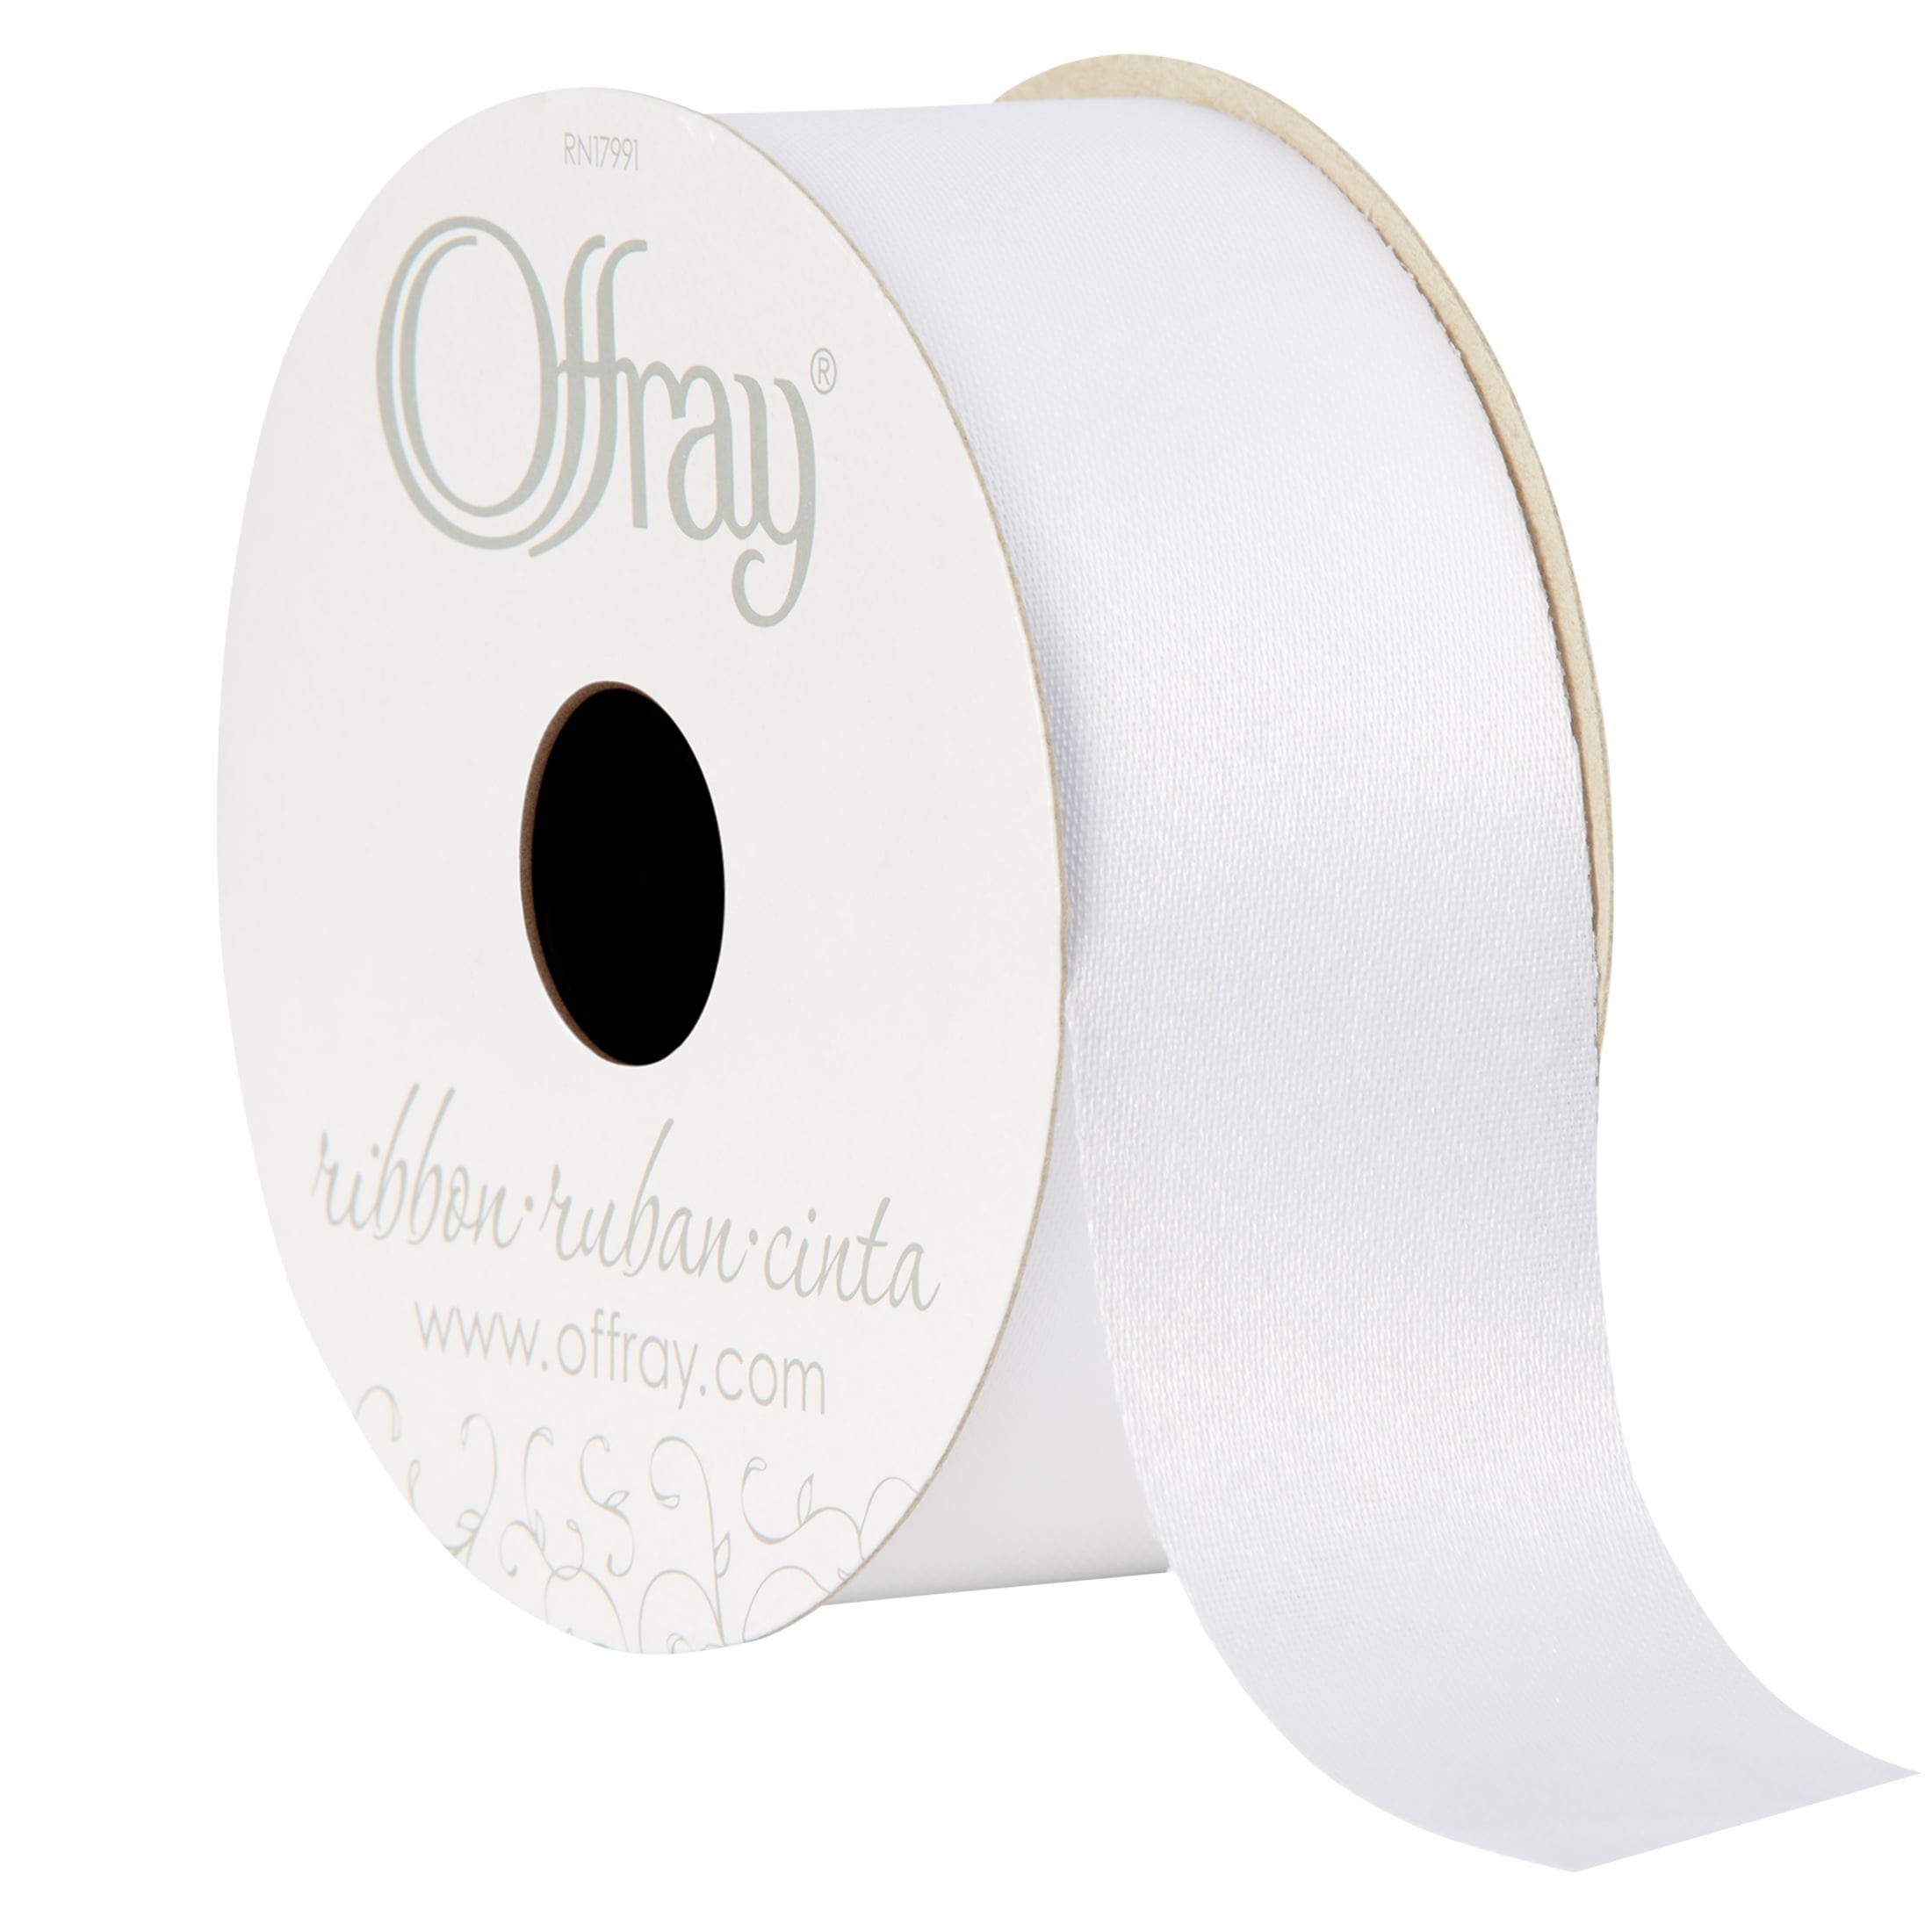 Offray Ribbon, White 1 1/2 inch Wired Houndstooth Woven Ribbon, 9